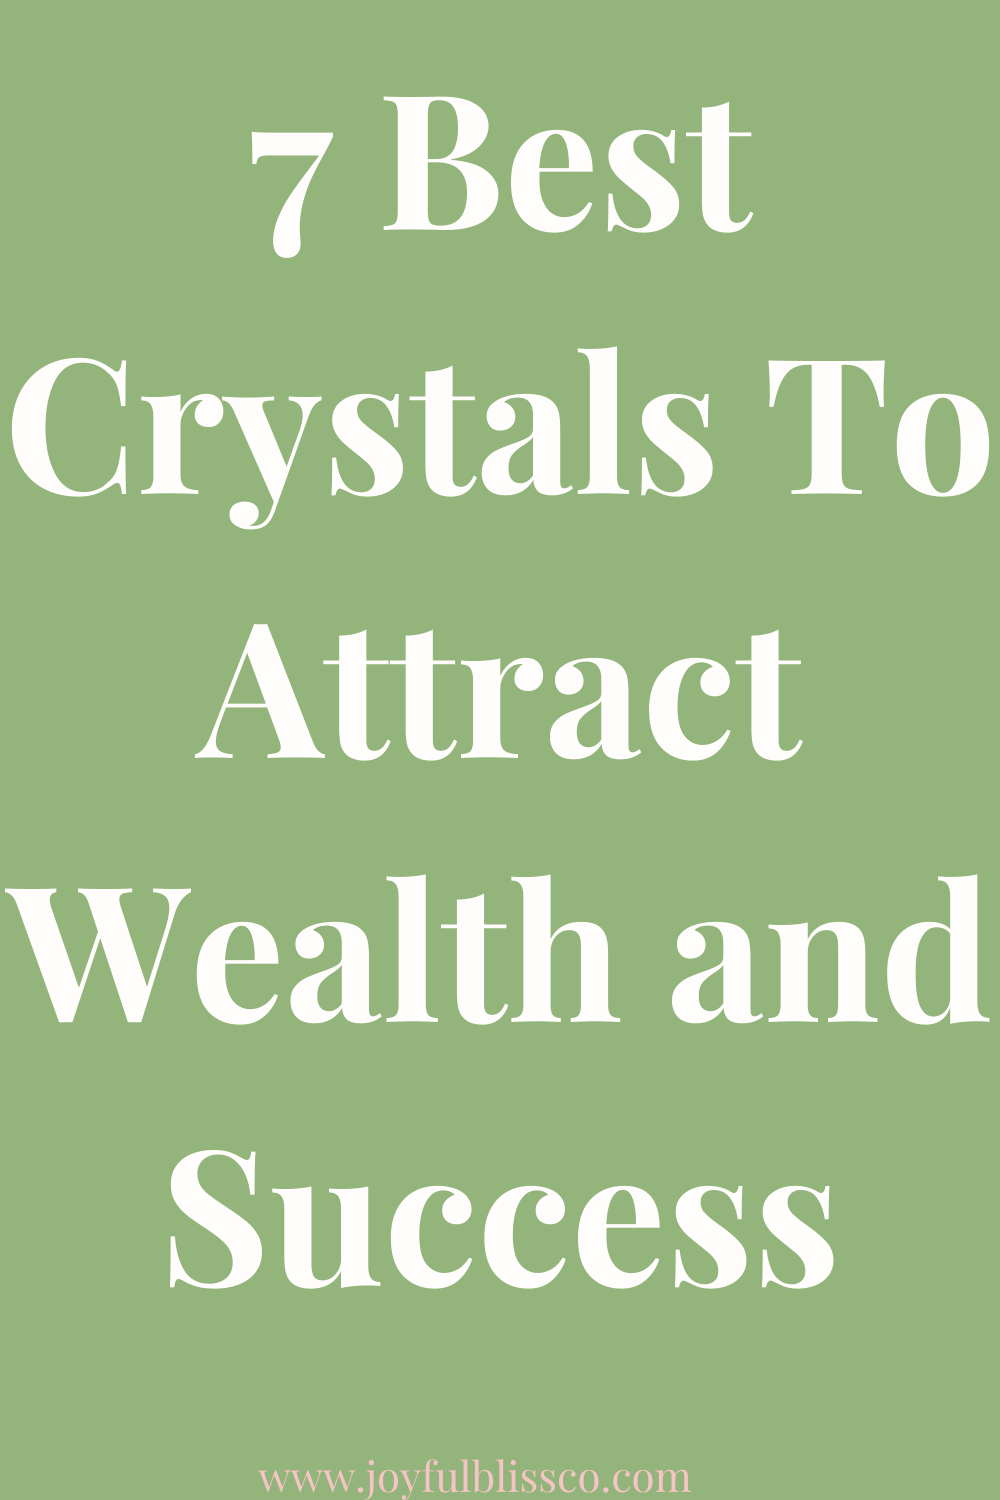 7 Best Crystals To Attract Wealth and Success